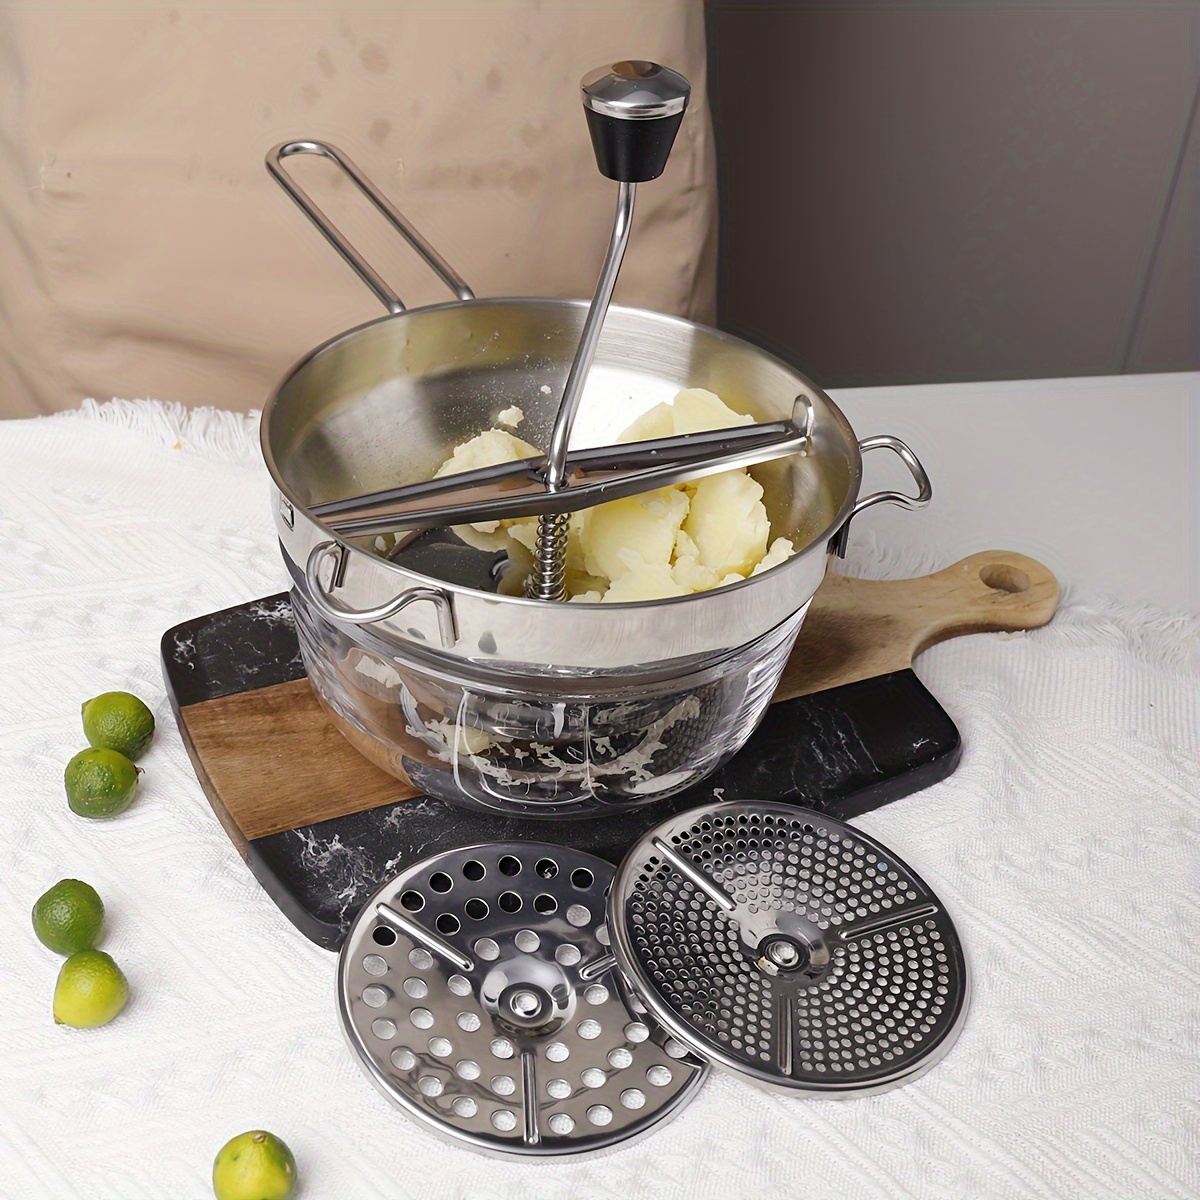 Should You Buy a Food Mill or a Potato Ricer?